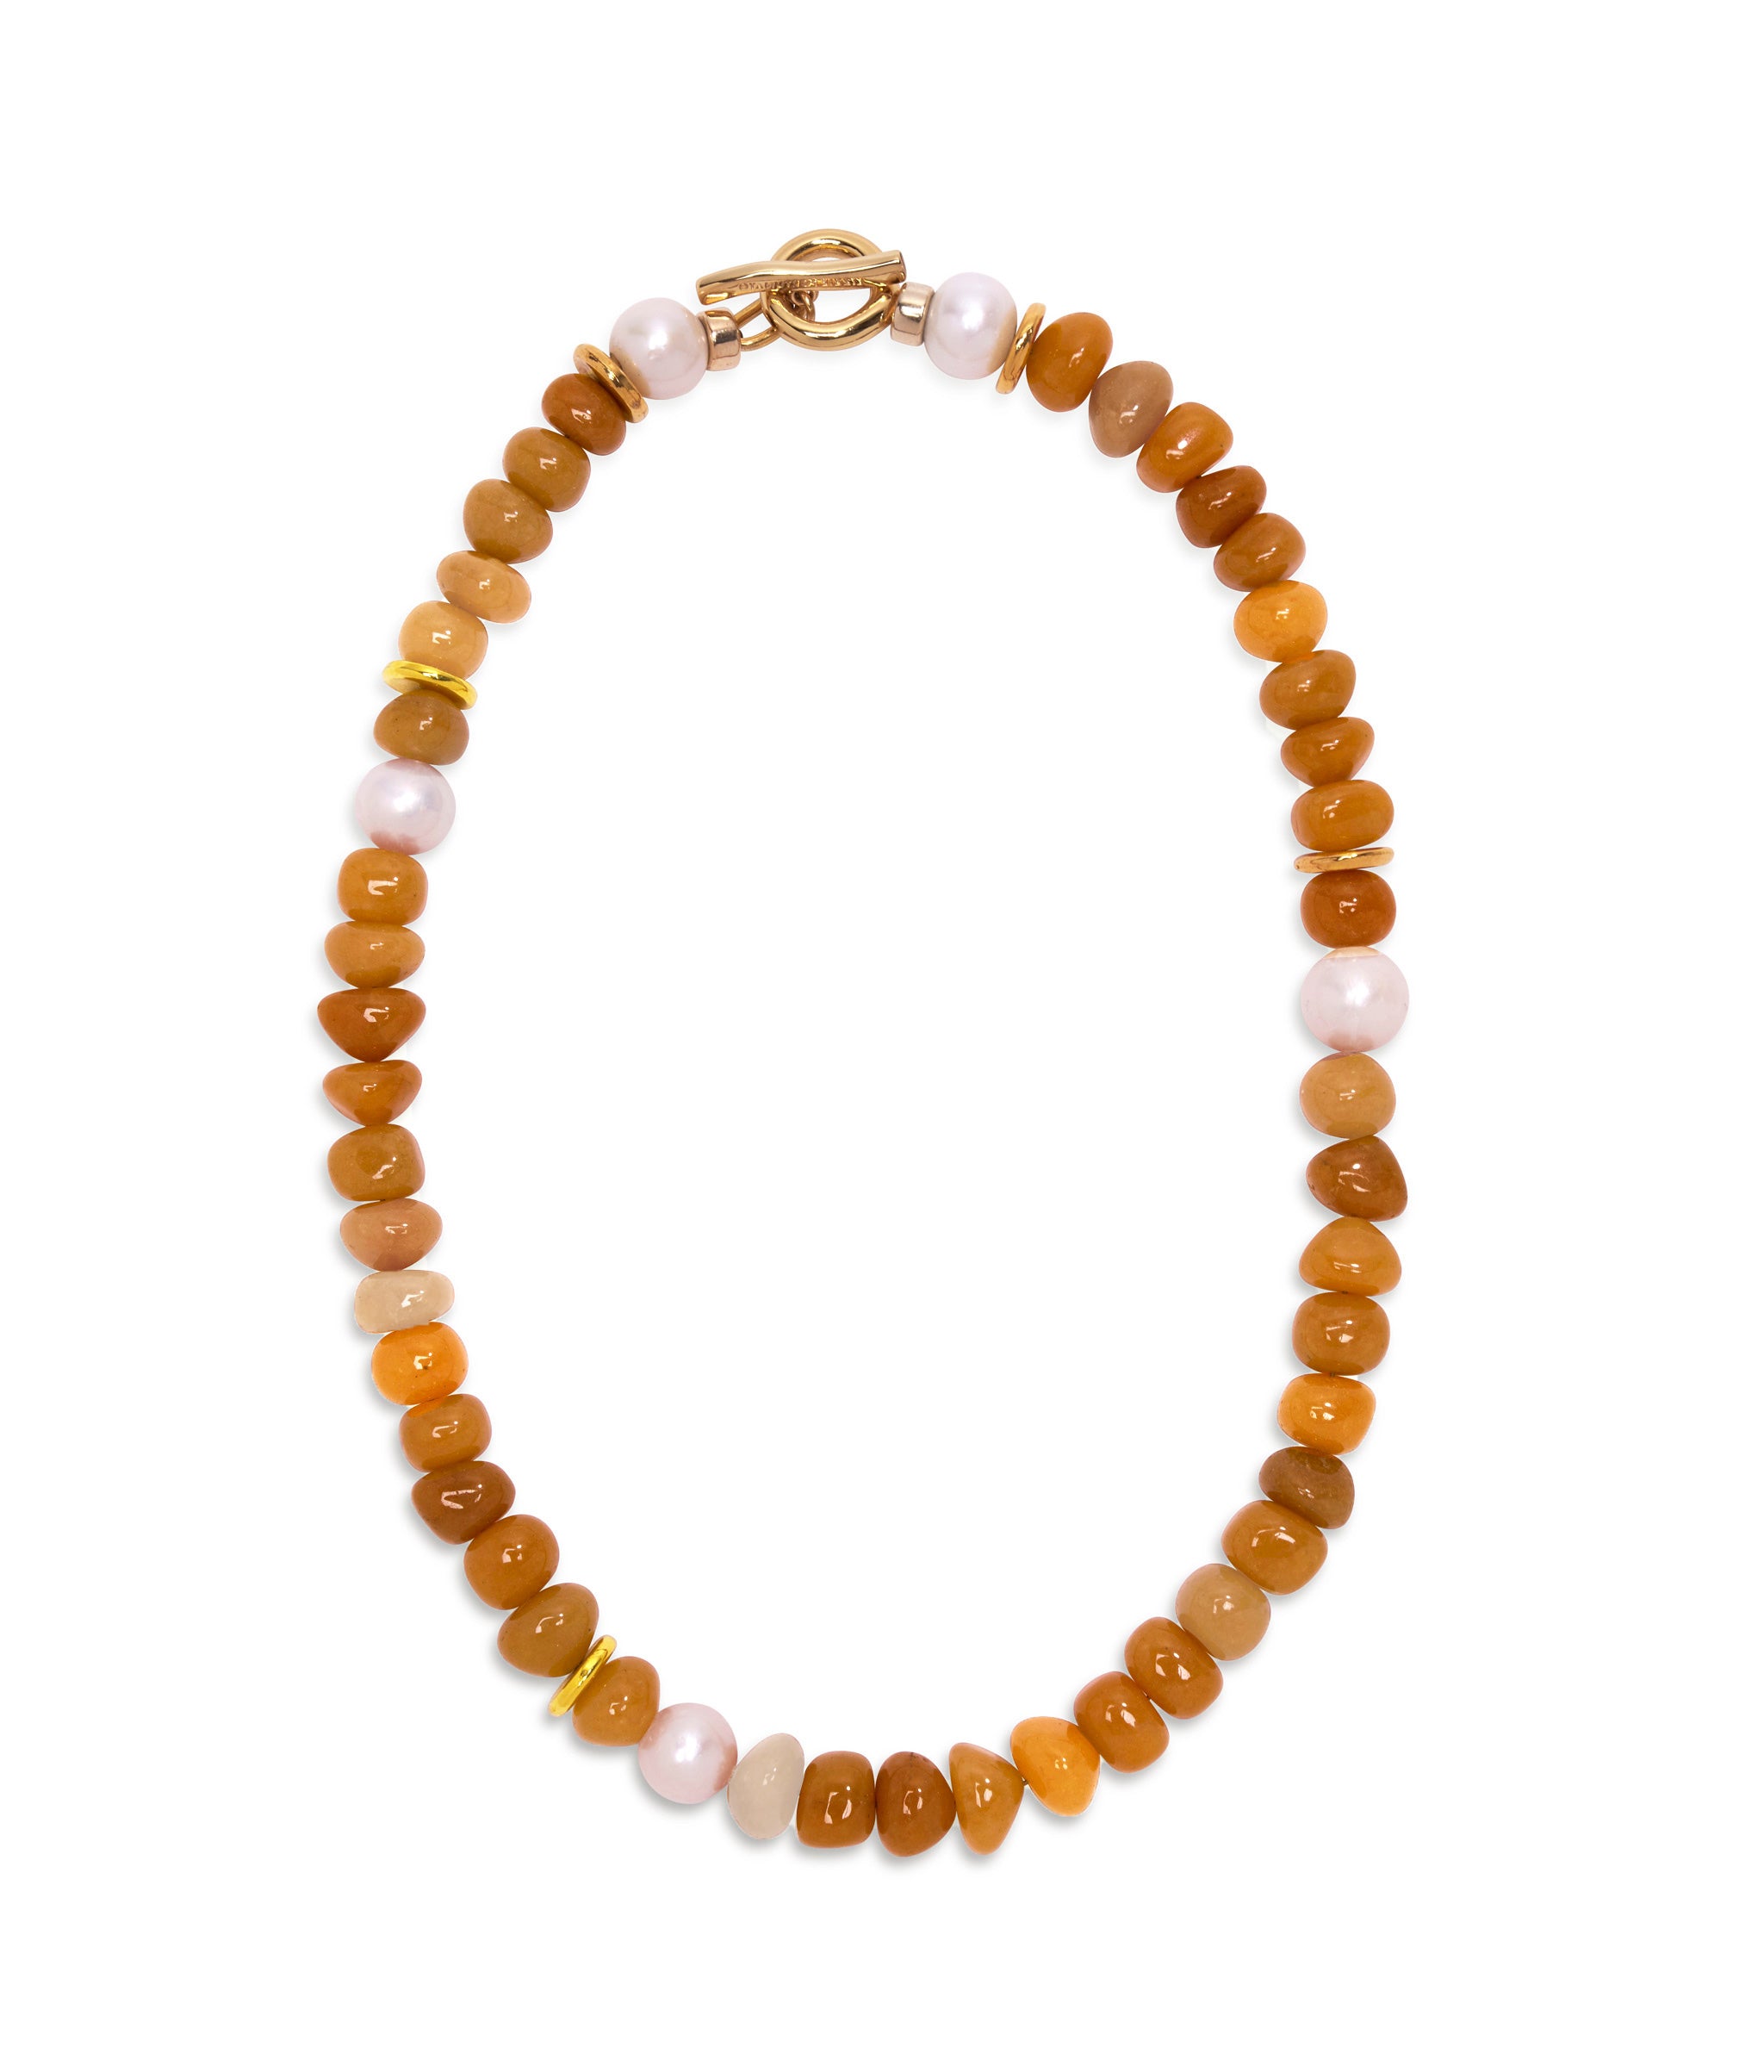 Mood Necklace in Red Aventurine. Red Aventurine necklace with assorted gold plated brass and pearls and toggle closure.